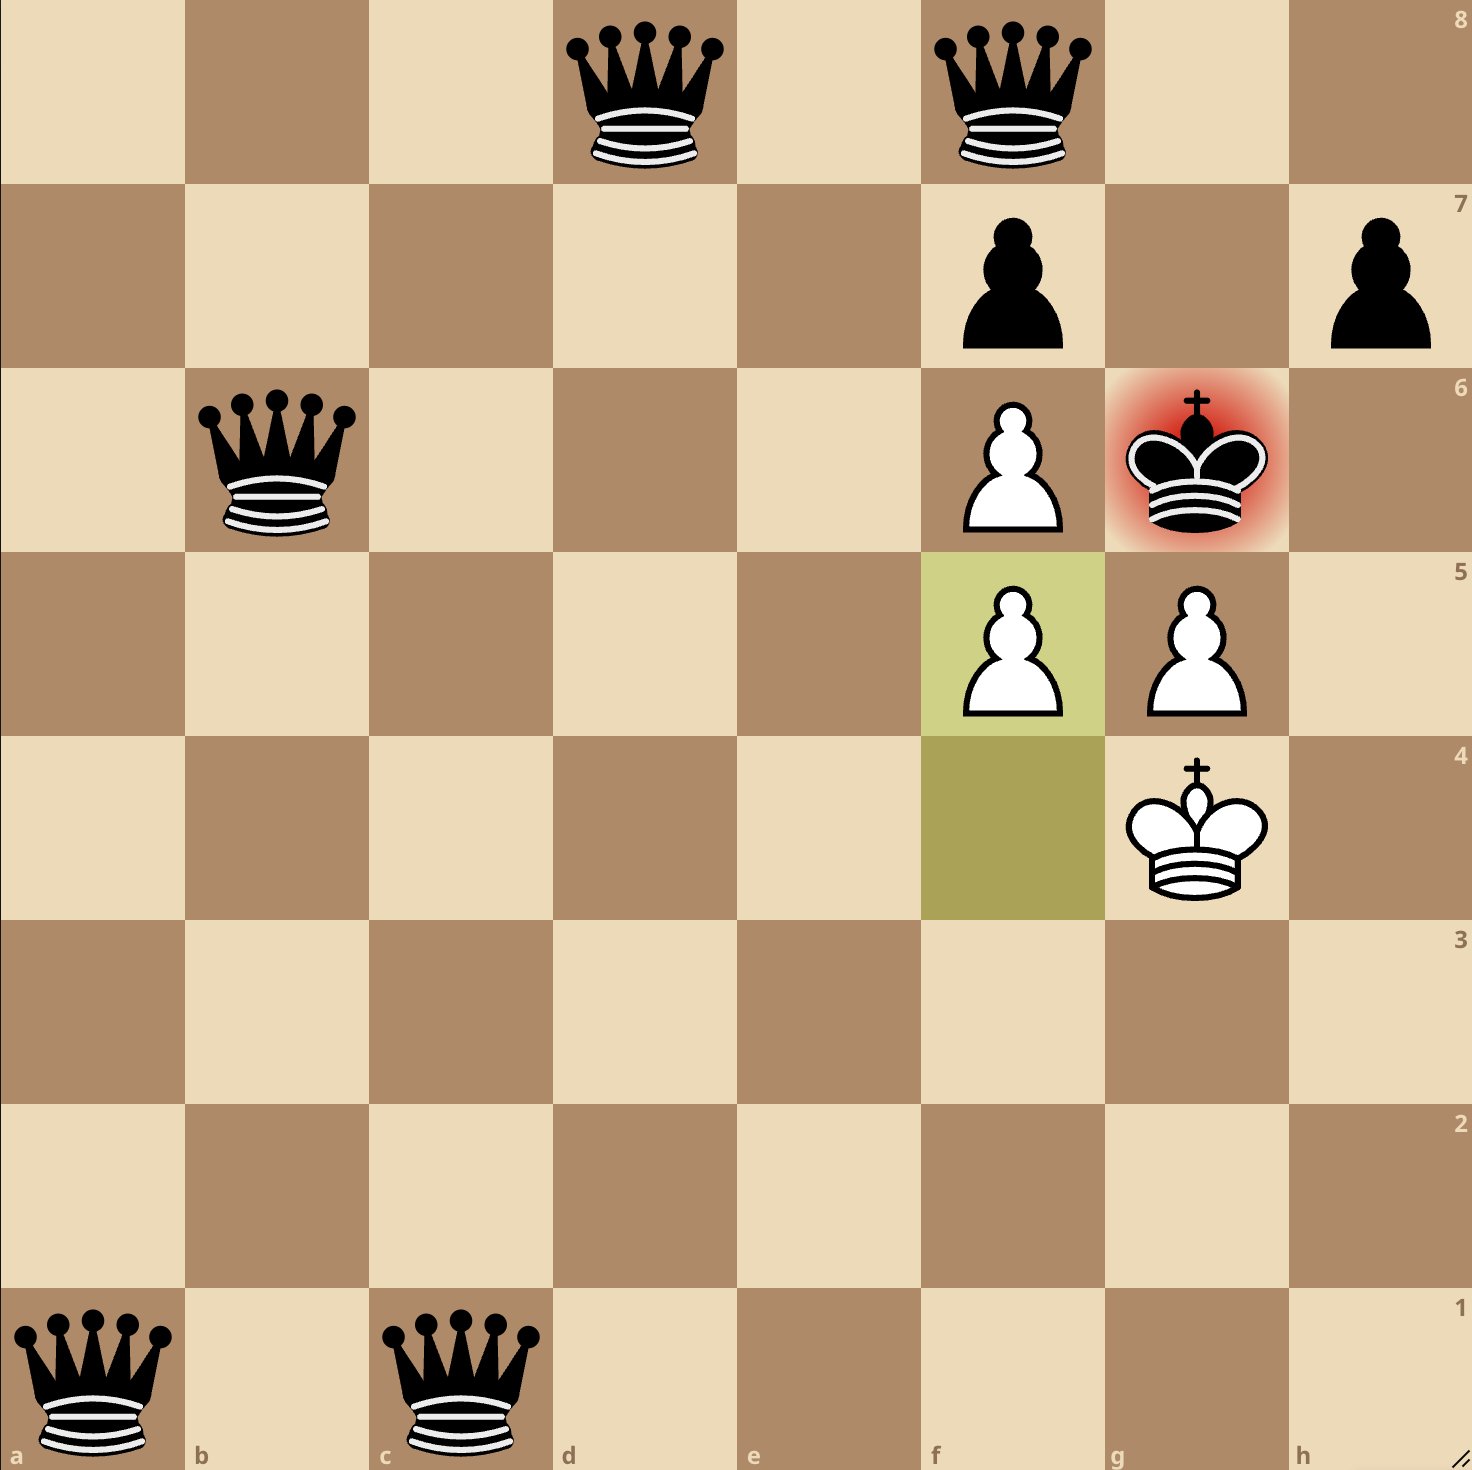 Video of me playing a person online (lichess.org) with a DGT e